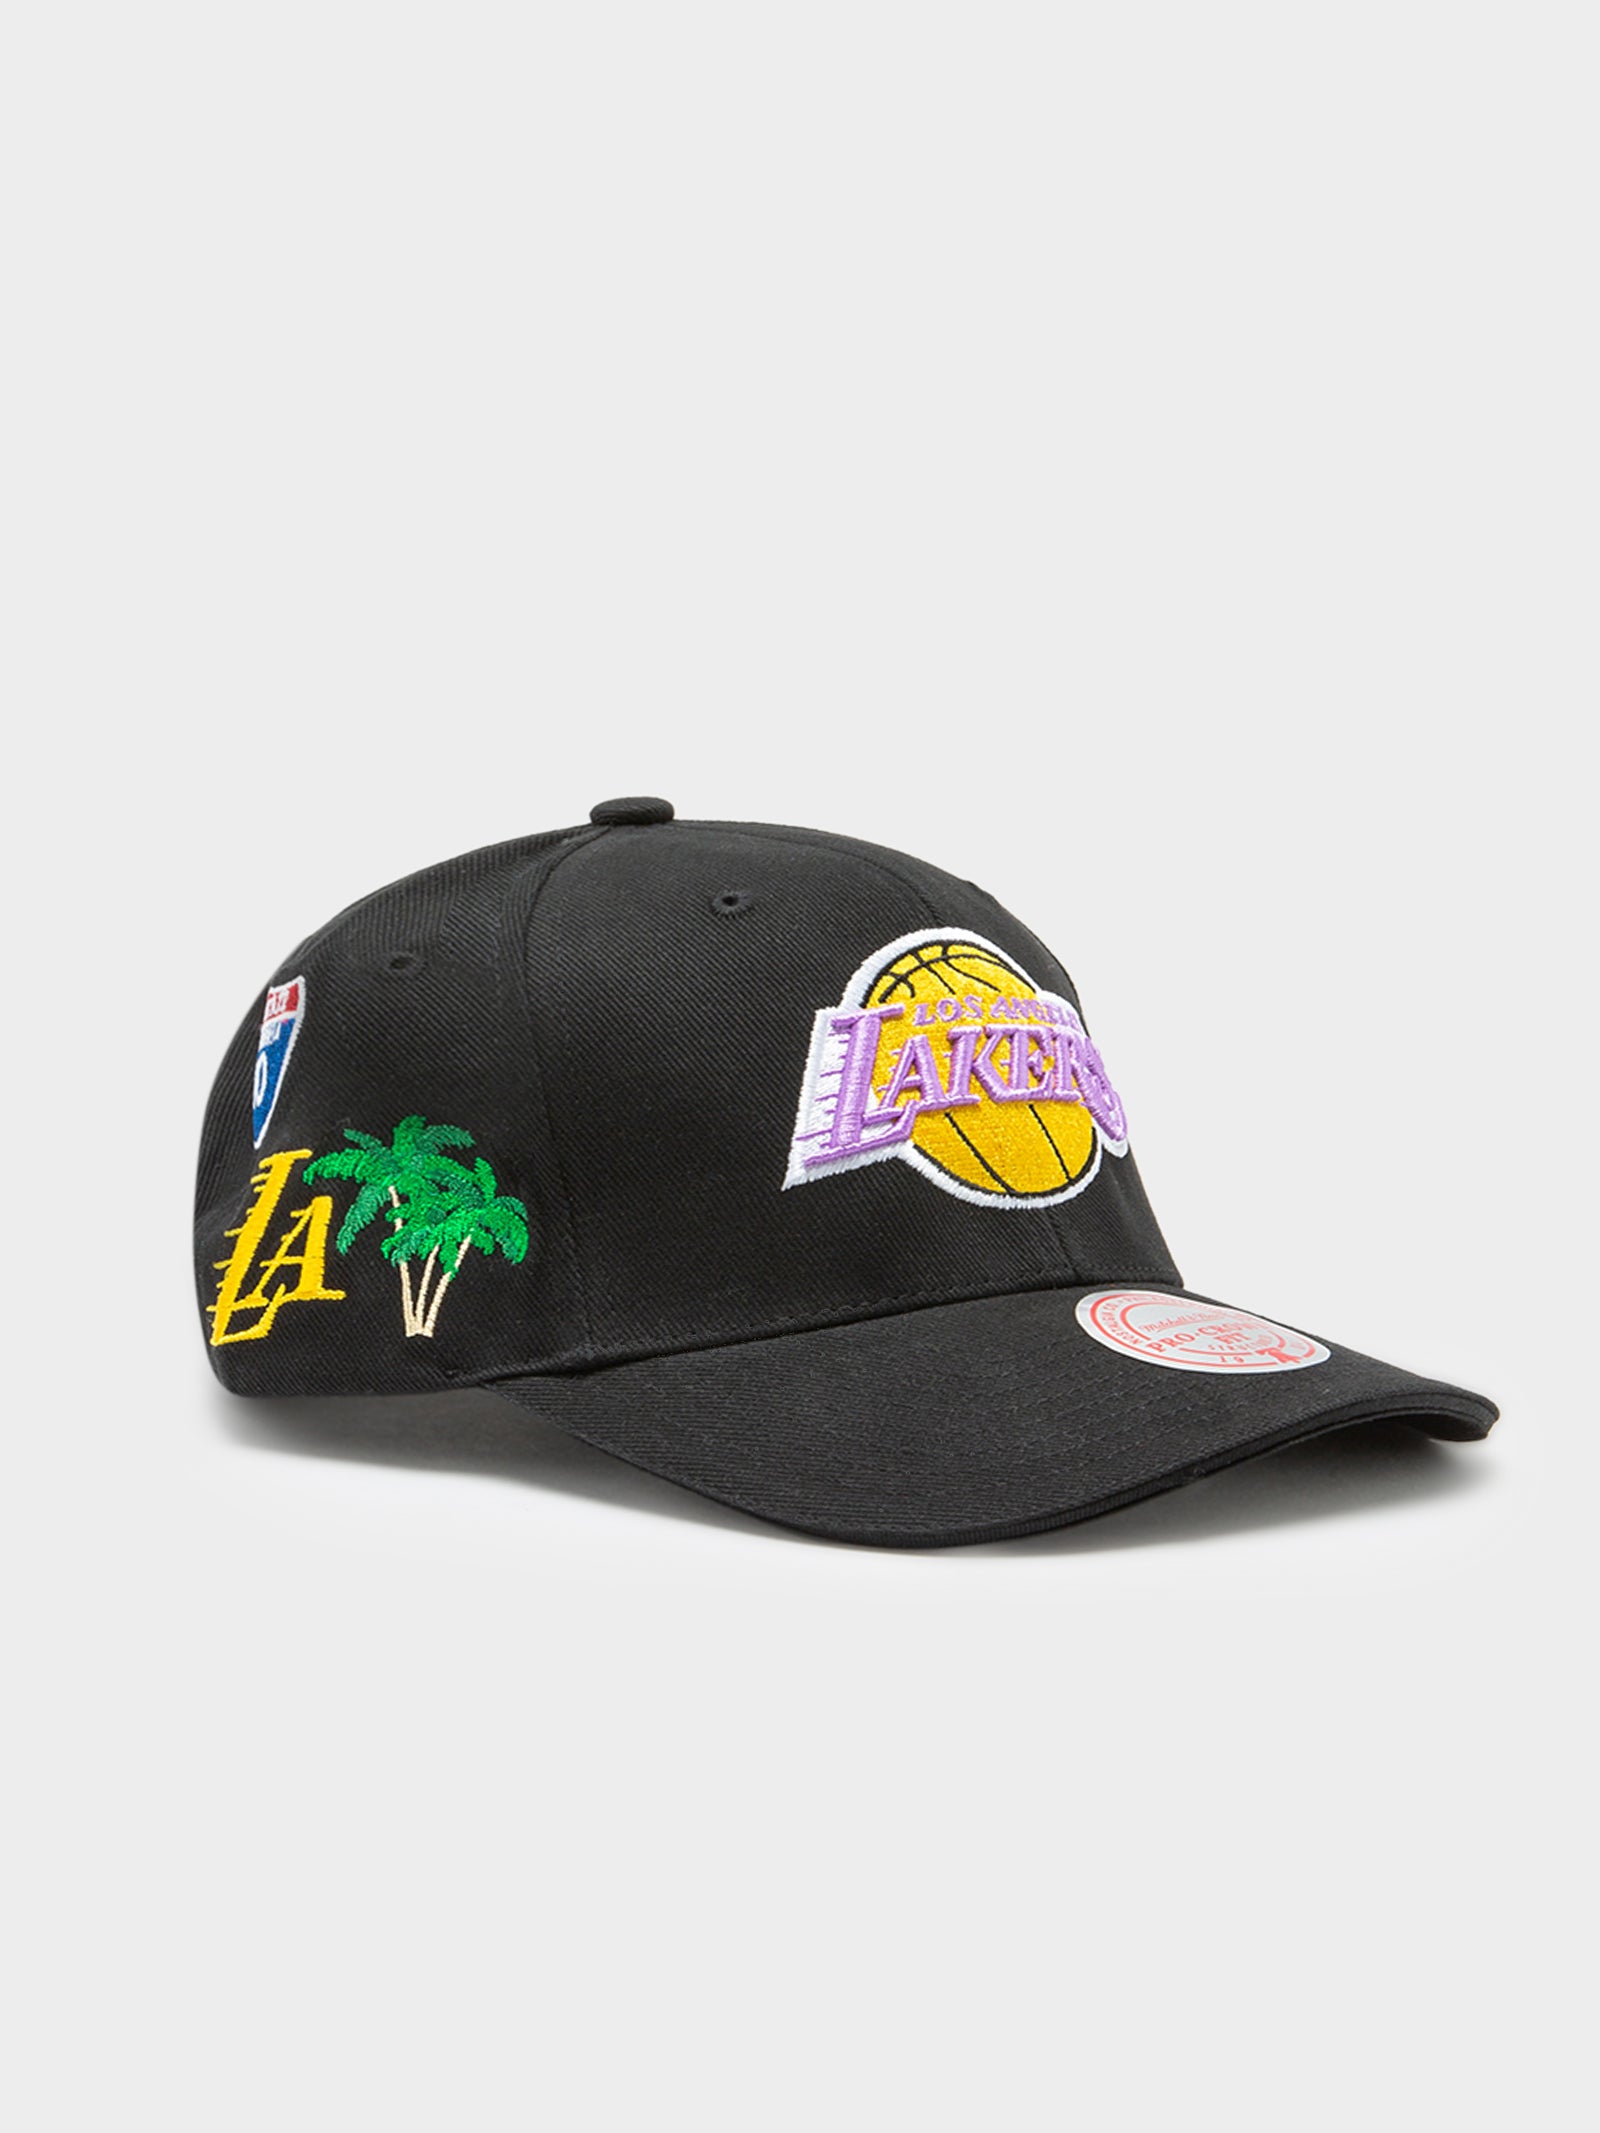 Los Angeles Lakers NBA Big Face Fashion Tank 5.0 By Mitchell & Ness -  Yellow - Mens